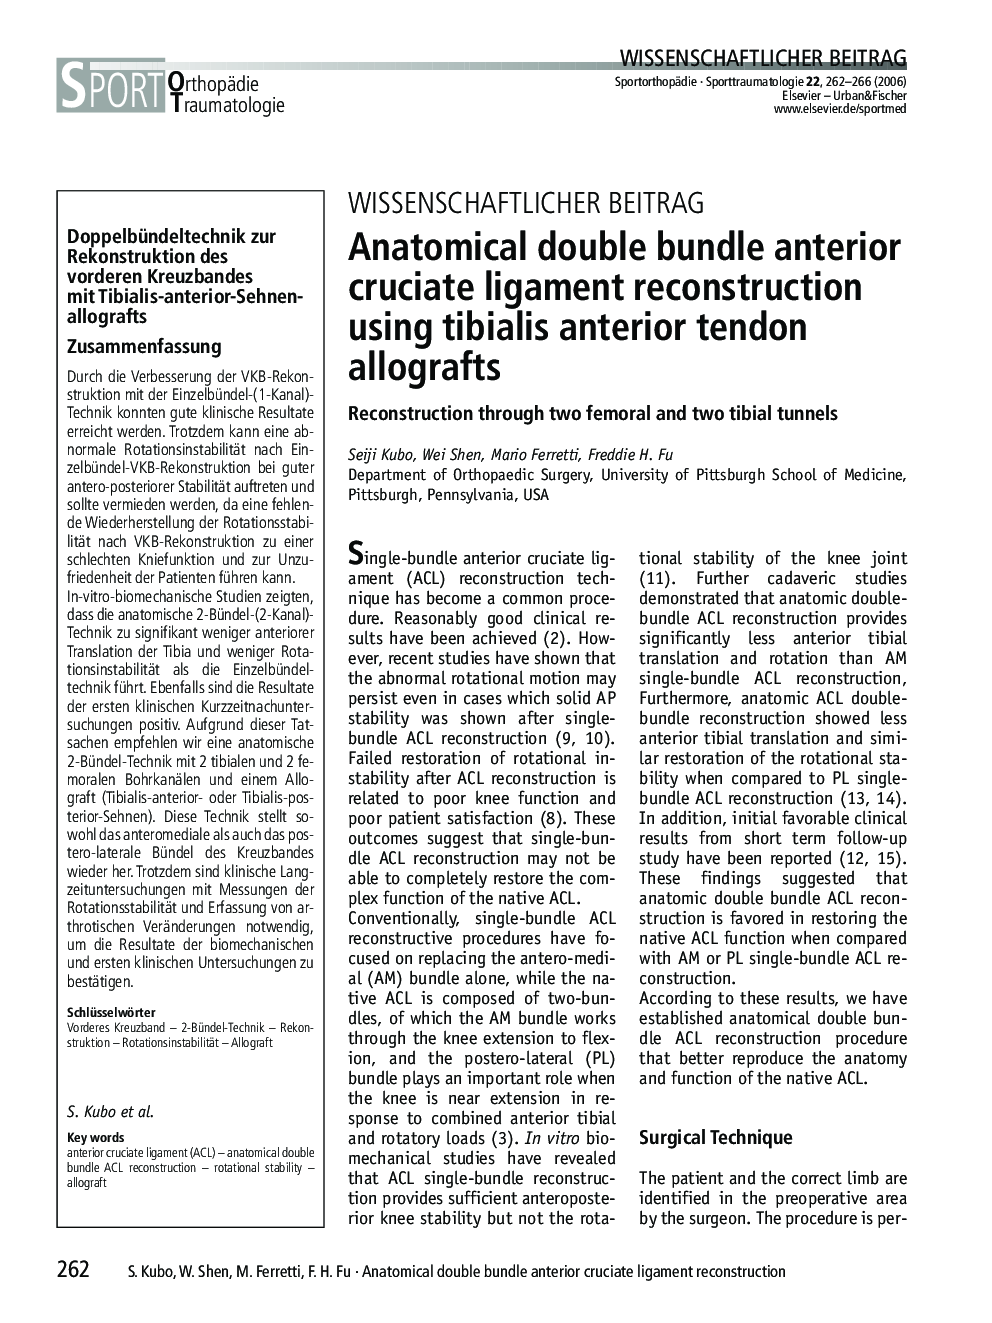 WISSENSCHAFTLICHER BEITRAG: Anatomical double bundle anterior cruciate ligament reconstruction using tibialis anterior tendon allografts: Reconstruction through two femoral and two tibial tunnels